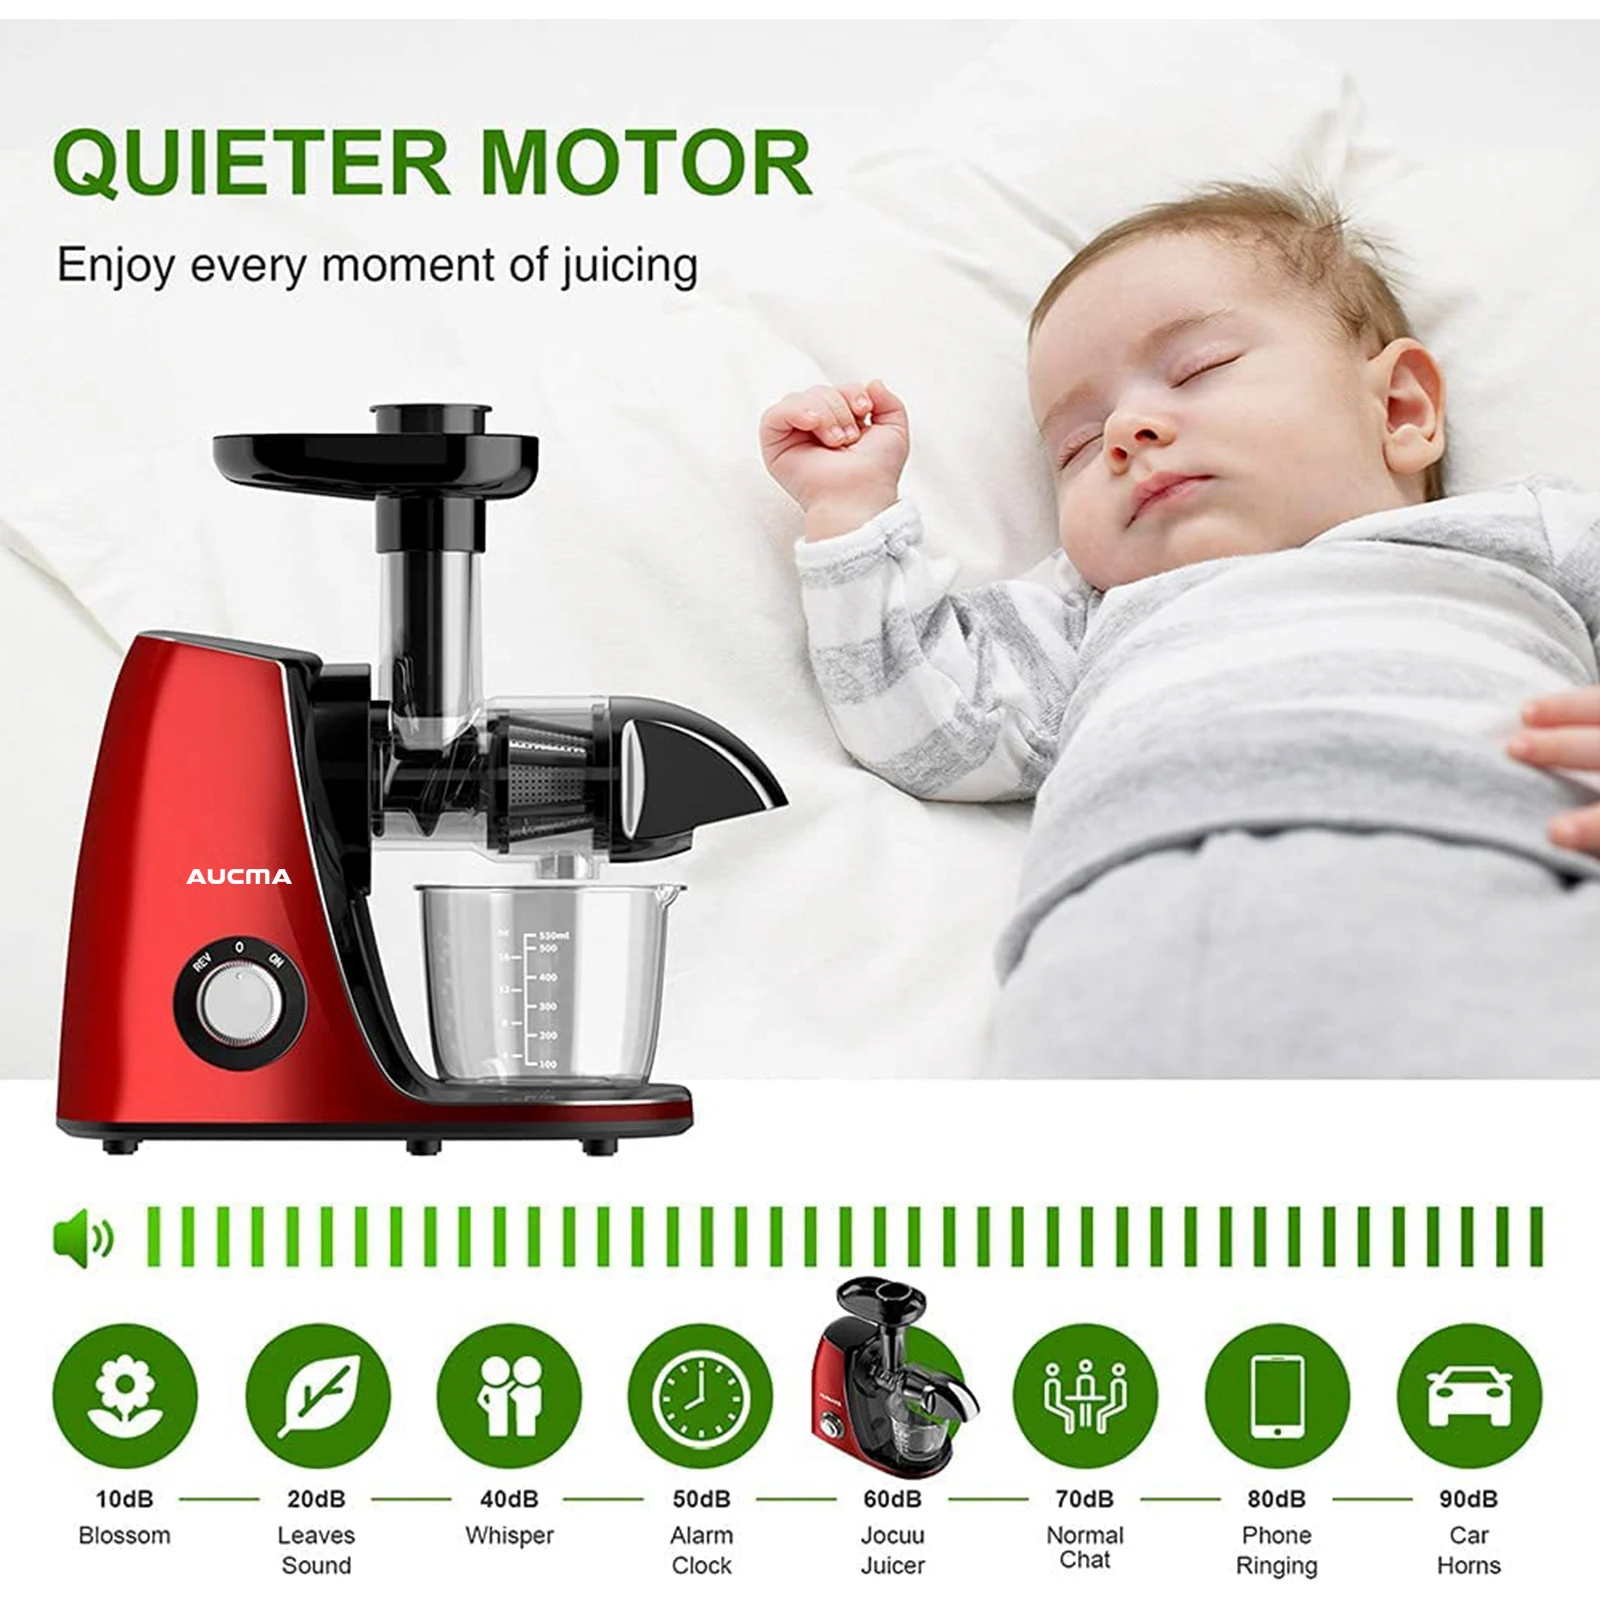 Aucma Juicer Machine Cold Press Juicer Machine with Quiet Motor and Reverse Function Recipes for High Nutrient Fruit Vegetable enlarge